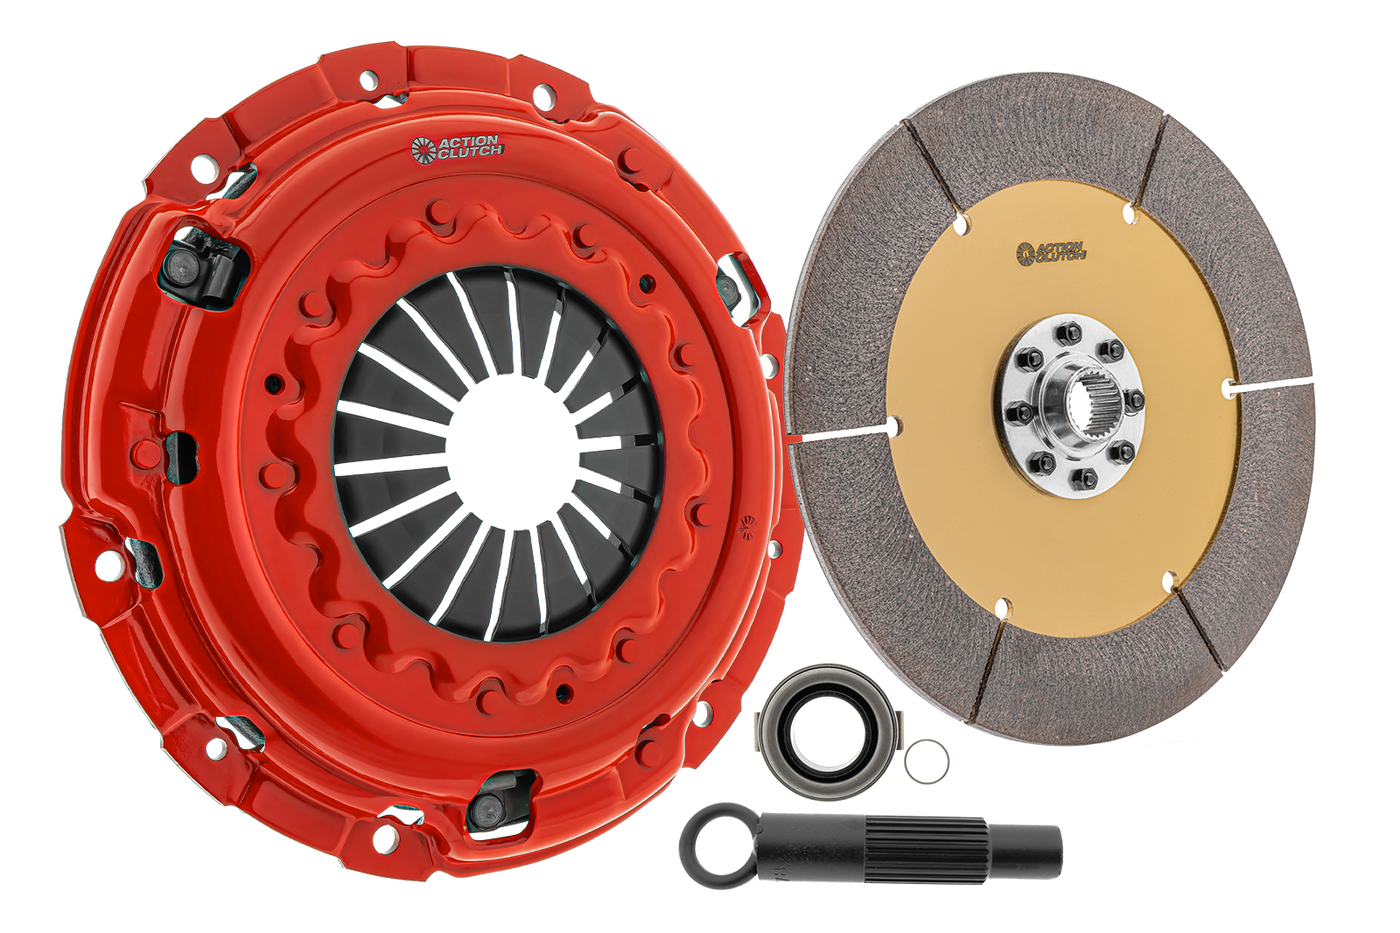 Ironman Unsprung Clutch Kit for Mitsubishi Eclipse 2000-2005 2.4L SOHC (4G64) Non-Turbo FWD